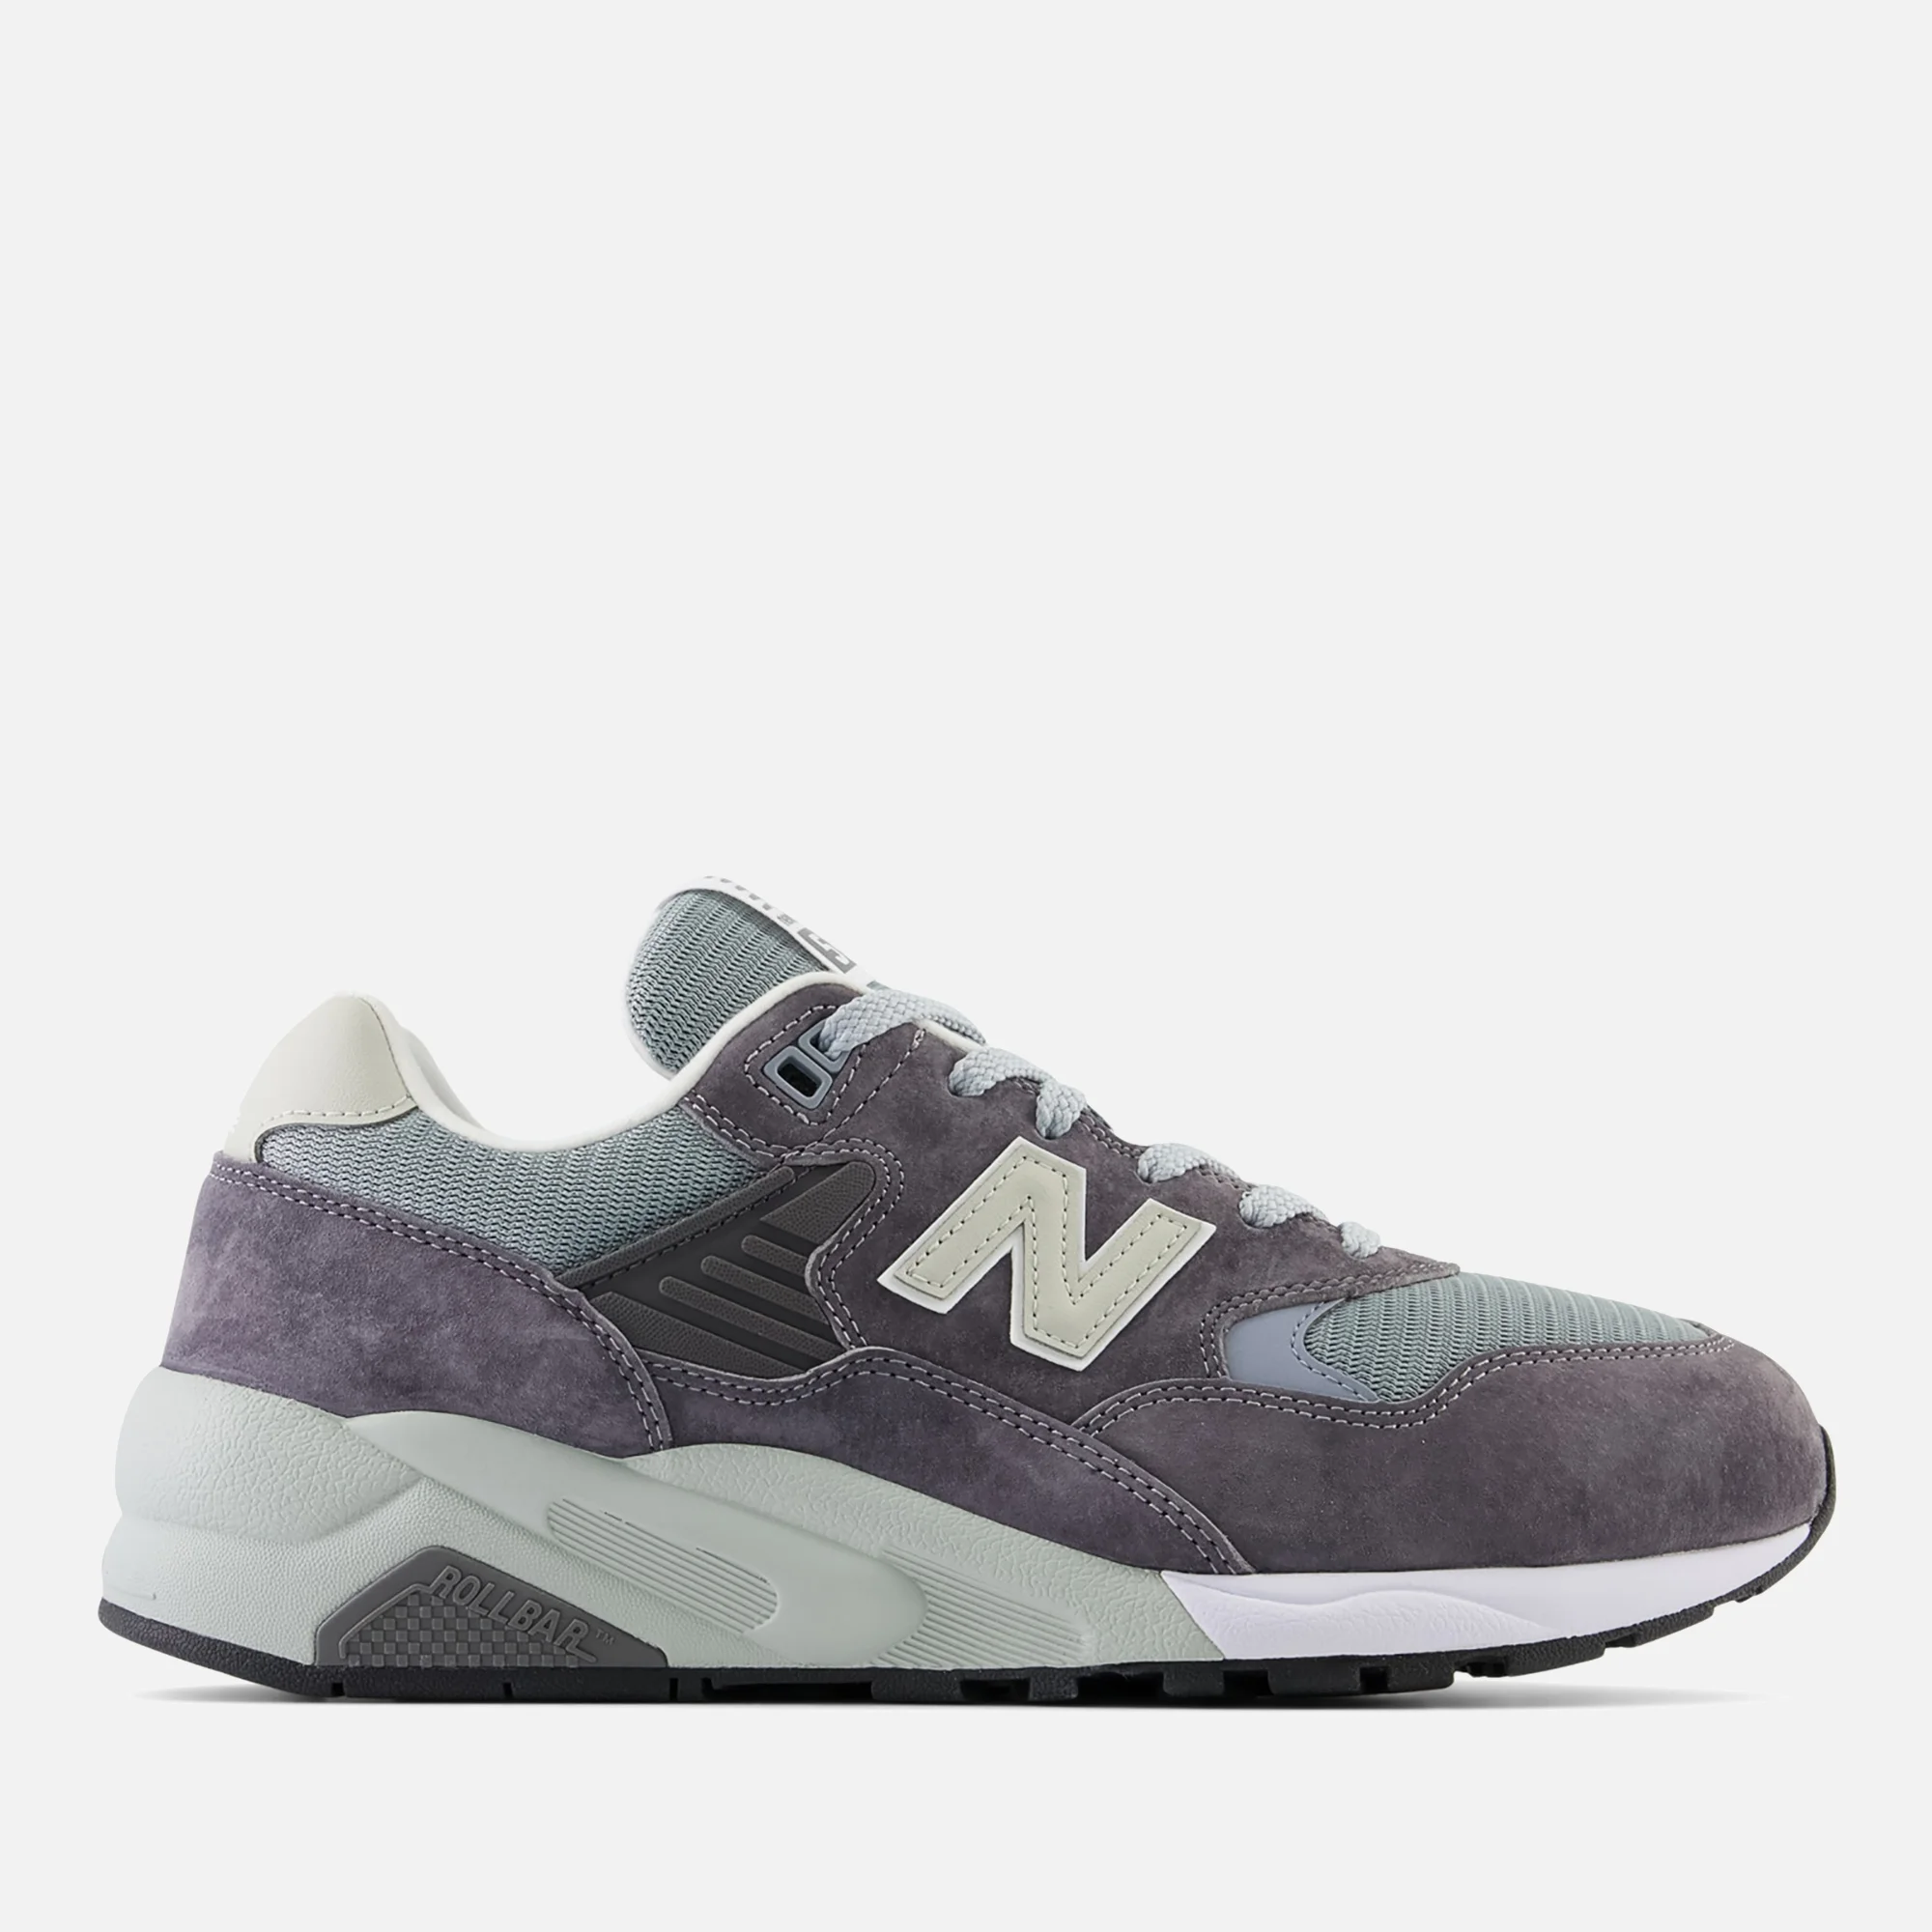 New Balance Men's 580 Suede and Mesh Trainers - UK 7 Image 1